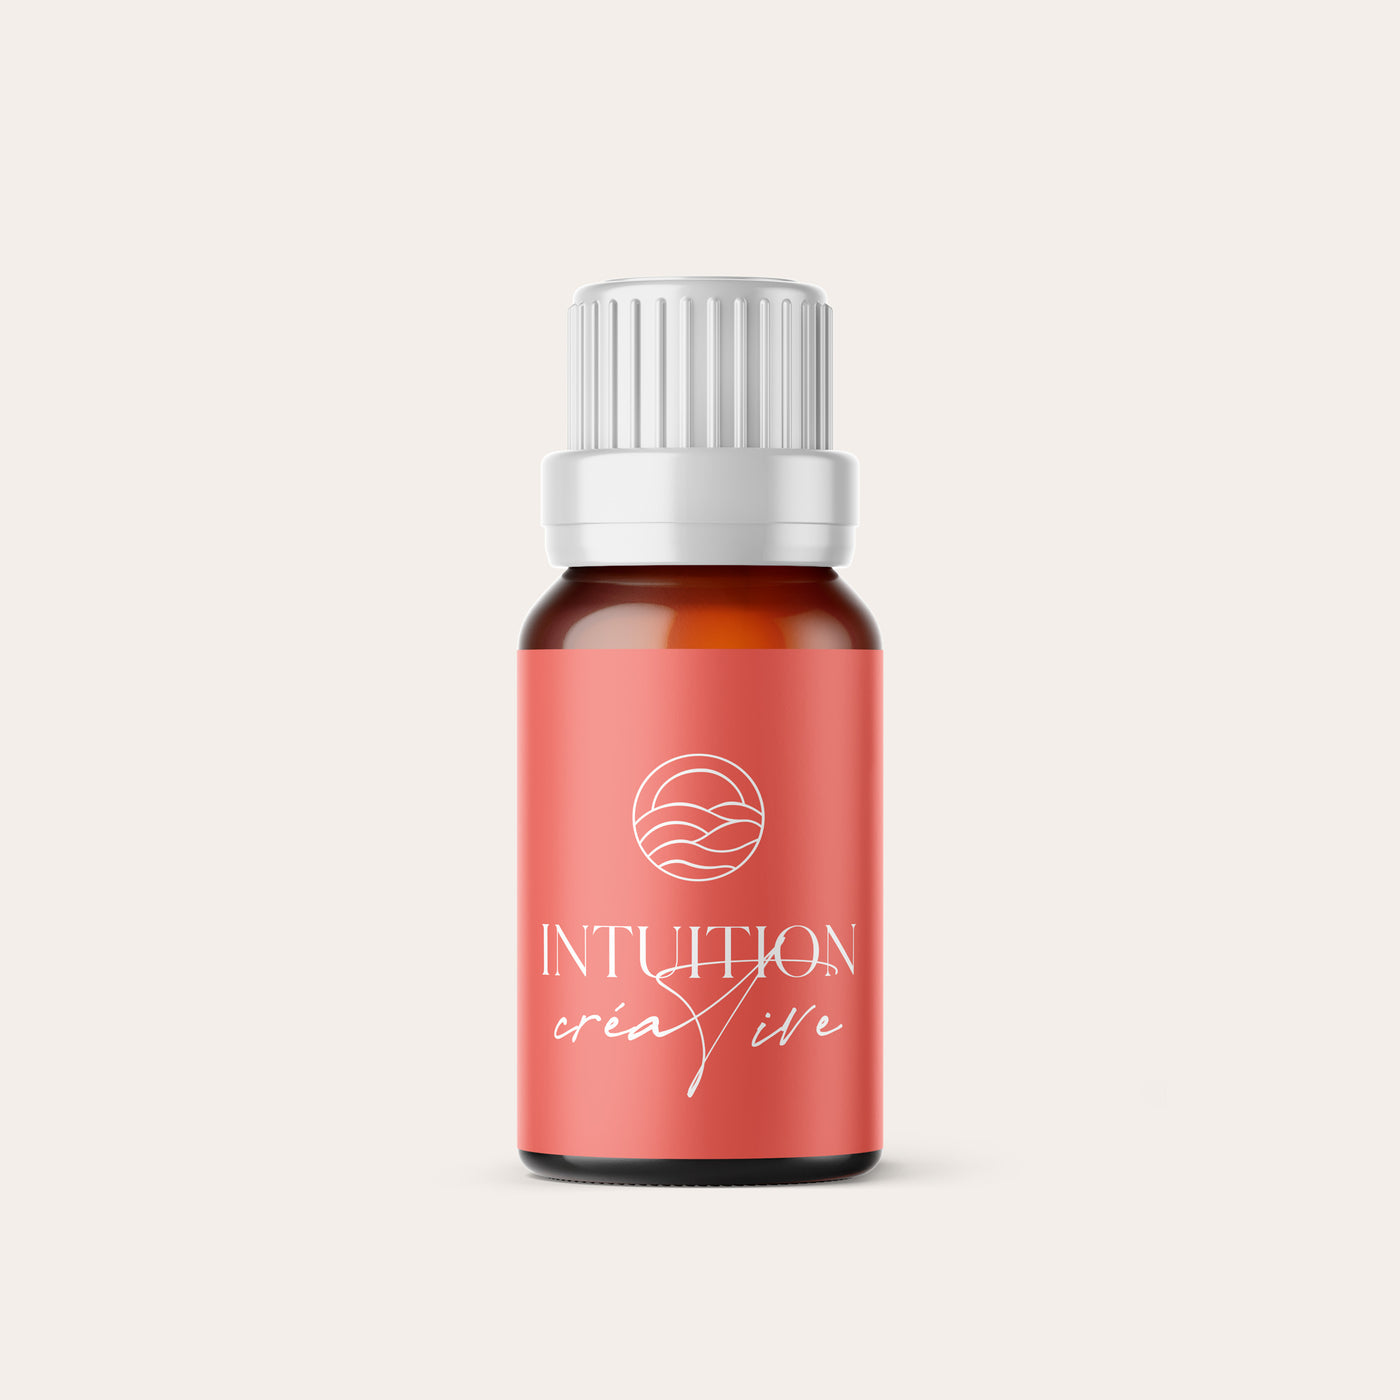 Intuition Créative - Synergie aromatique 100% pure